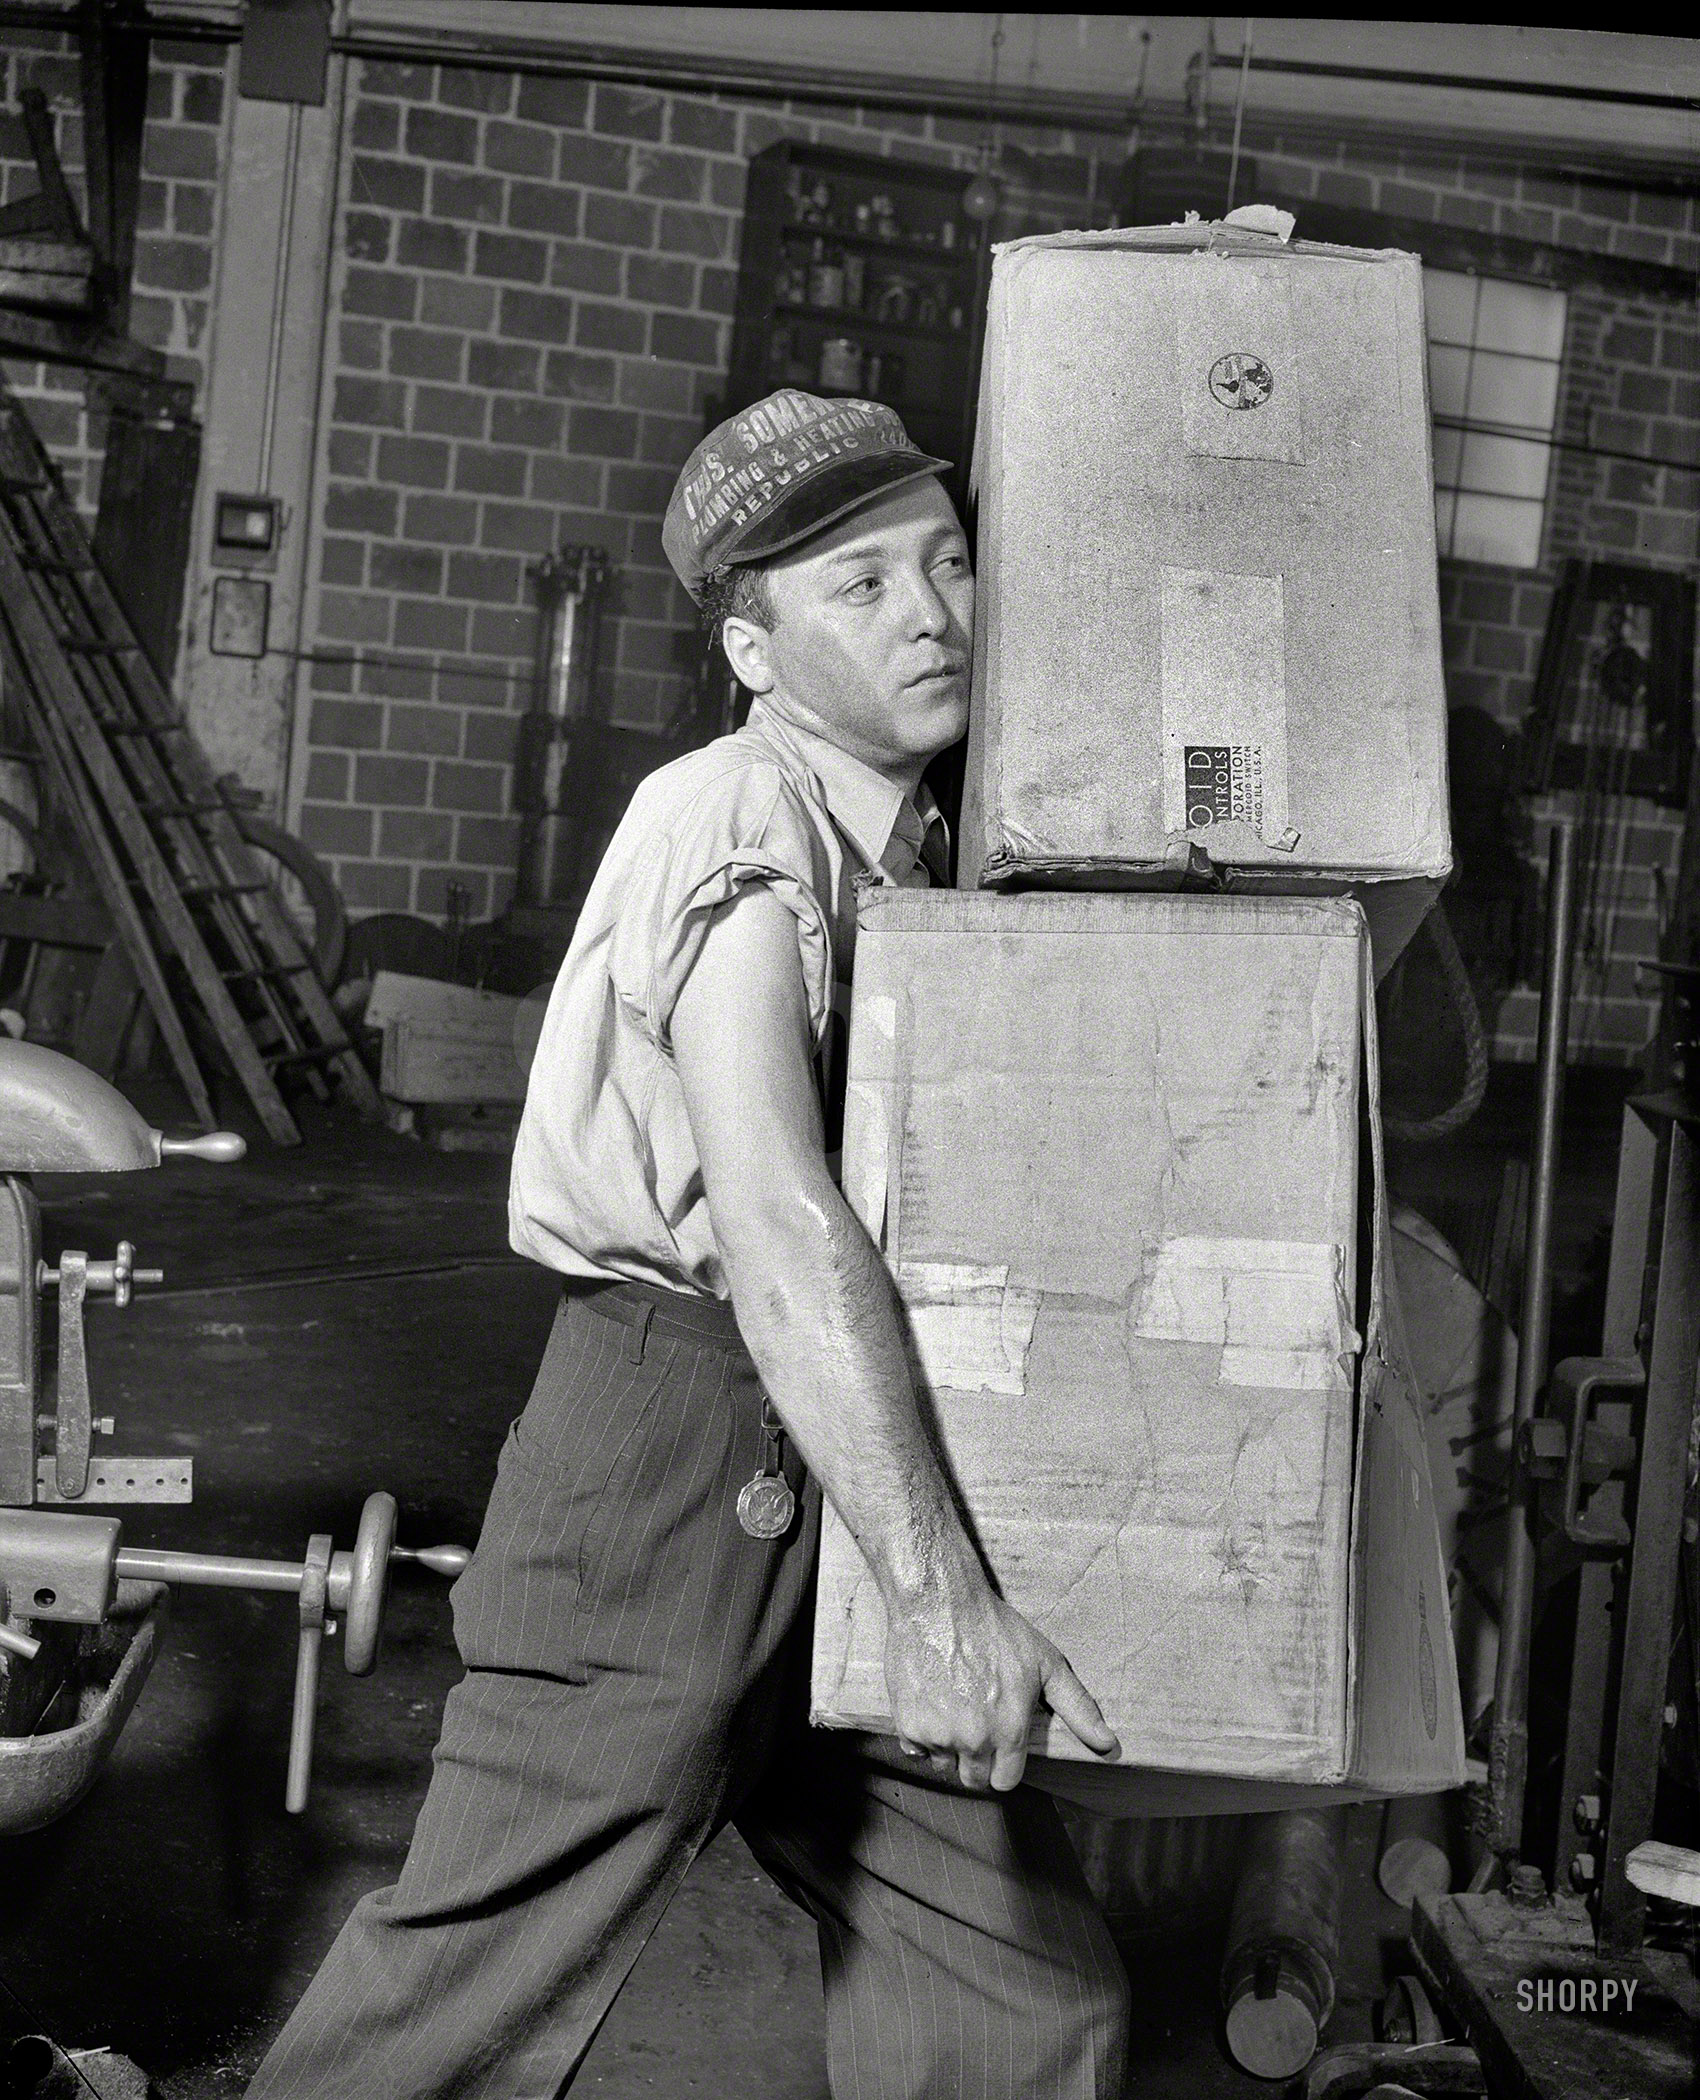 June 1942. "Industrial safety. Accident prevention. The employee who carries in such a way as to obscure his vision is not saving time -- he is endangering himself and his fellow workers. A few extra trips, or the use of a truck when necessary, eliminates possible man-hour loss from this hazard." Photo by Howard Liberman for the Office of War Information. View full size.